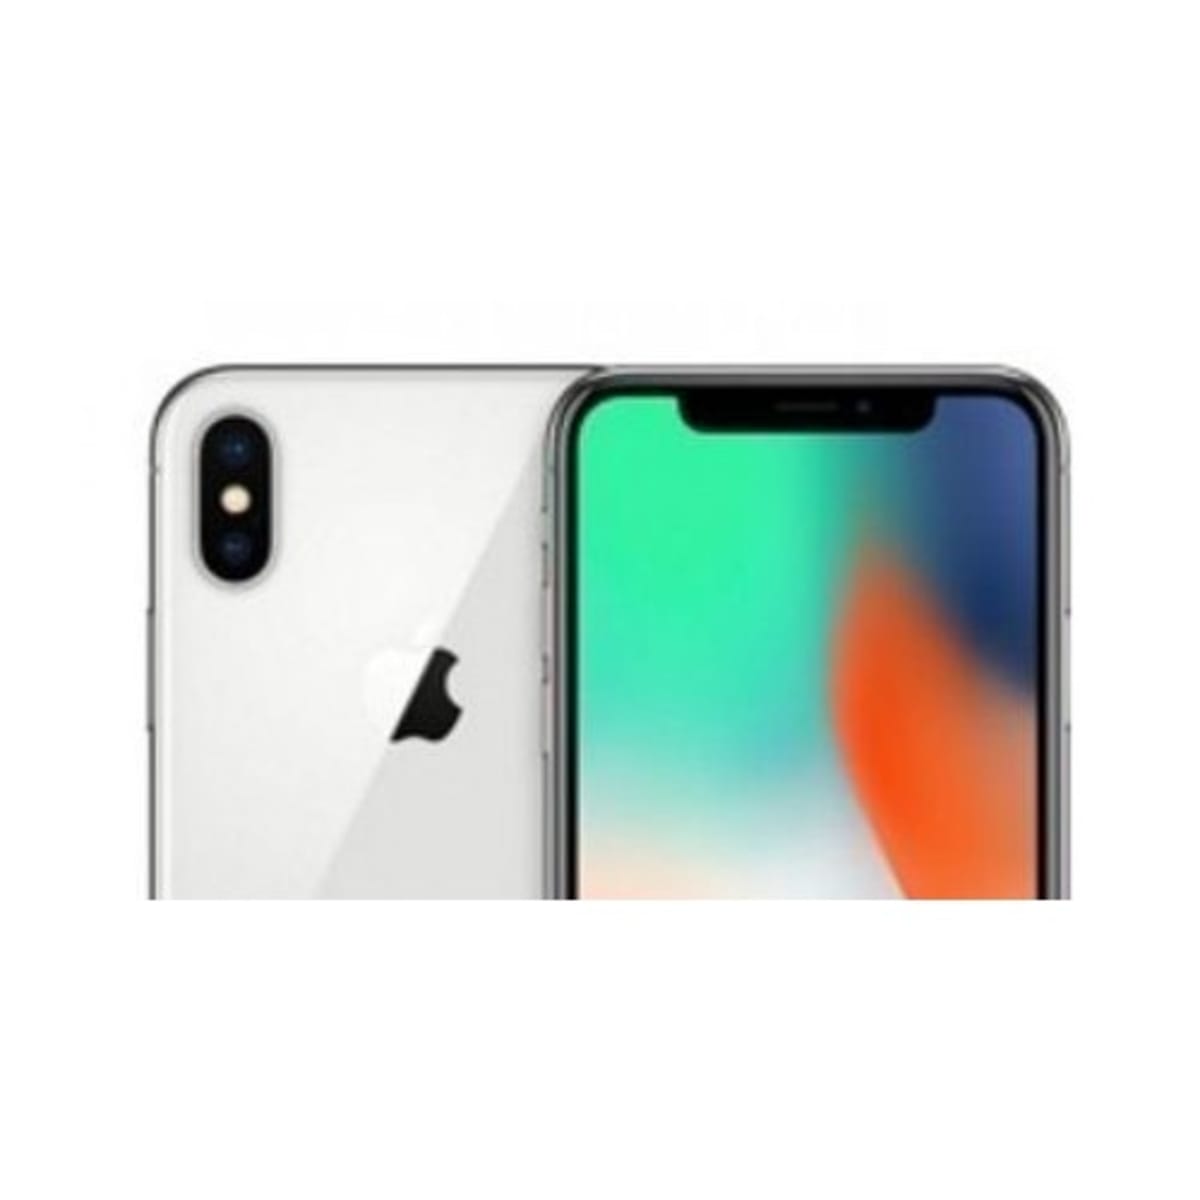 iPhone X - 64 GB Online at Best Price On